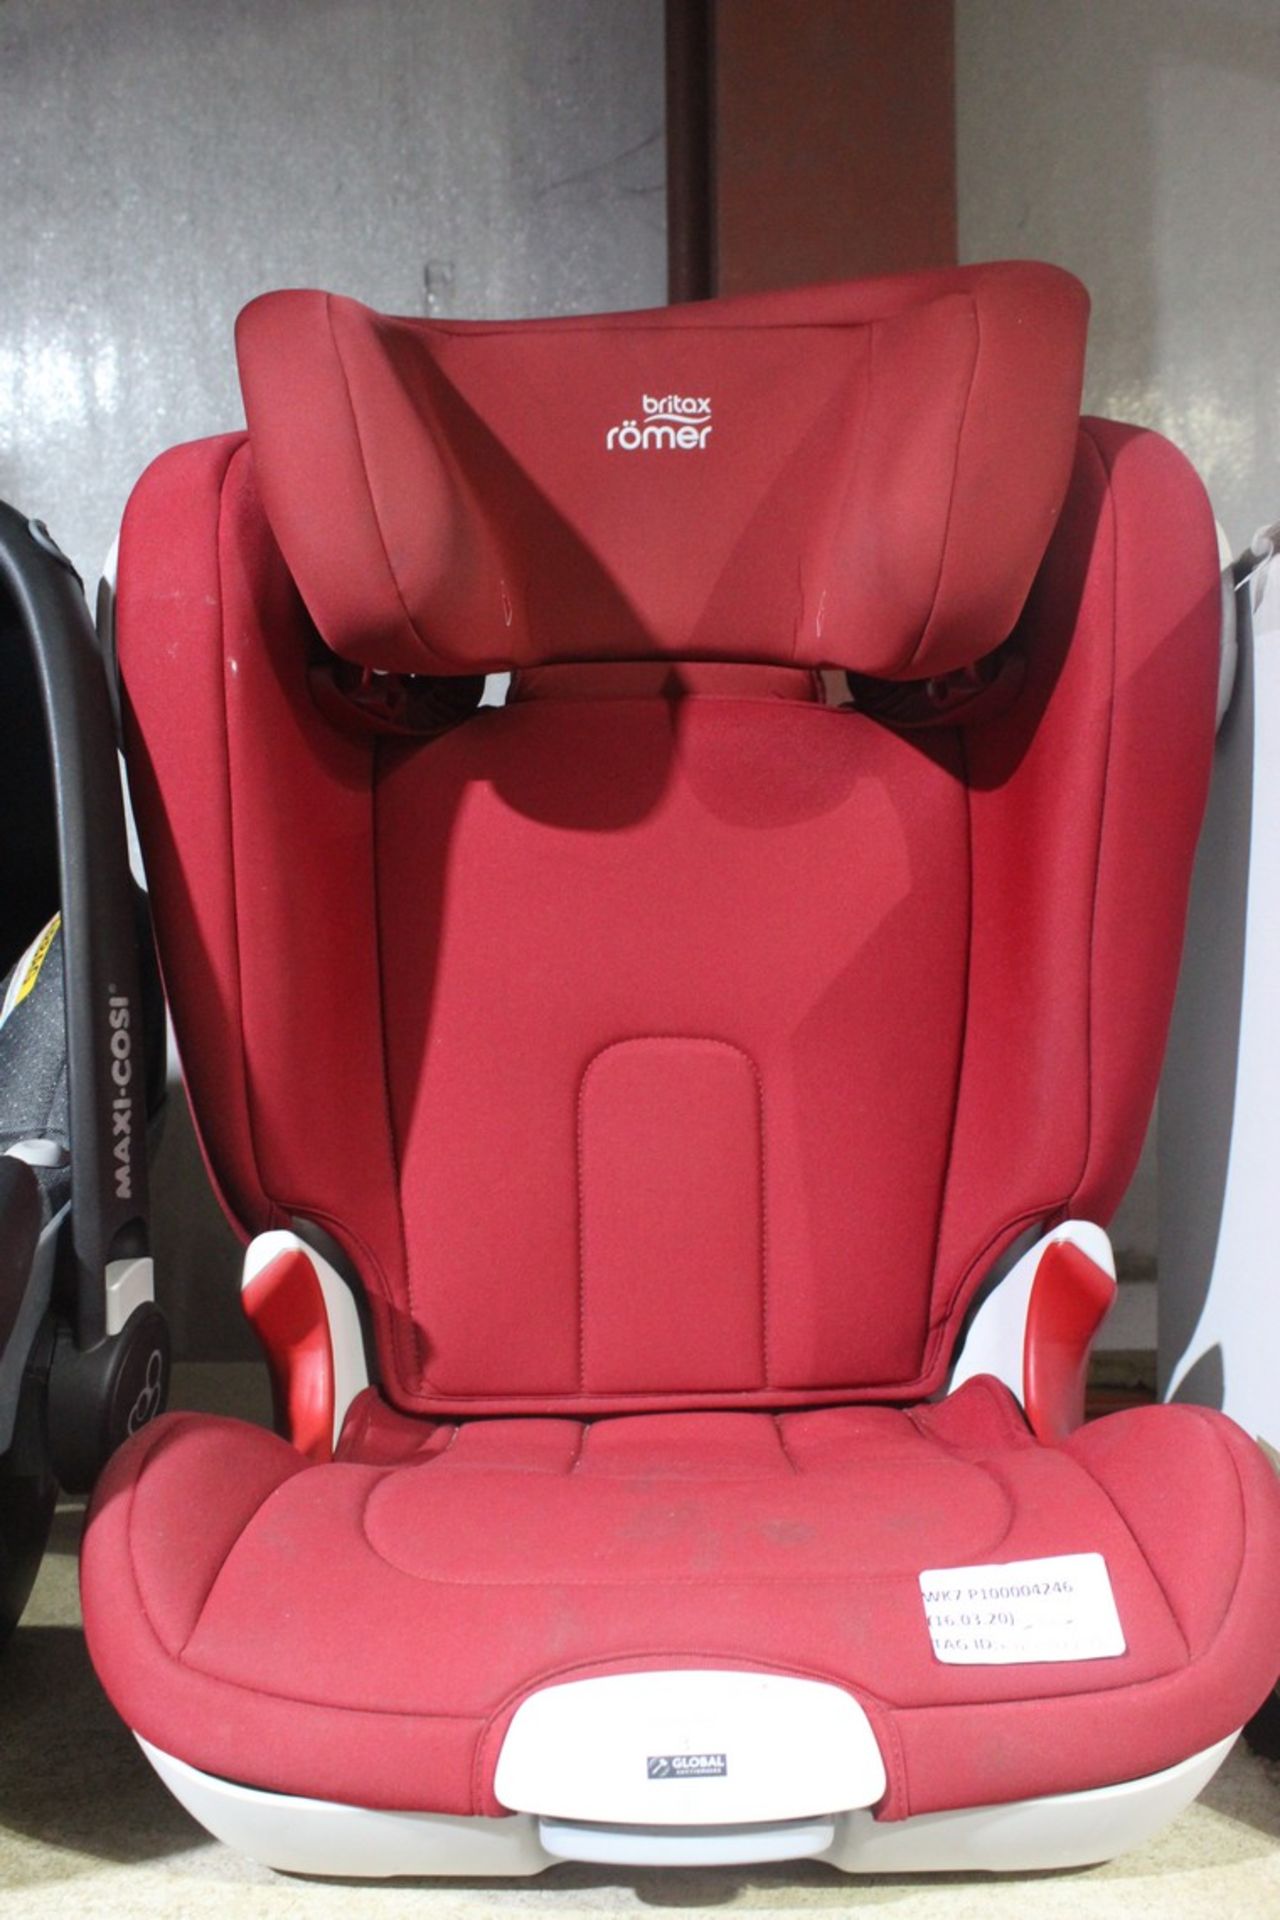 Brittax Roma In Car Kids Safety Seat RRP £60 (RET00973778) (Appraisals Available Upon Request)